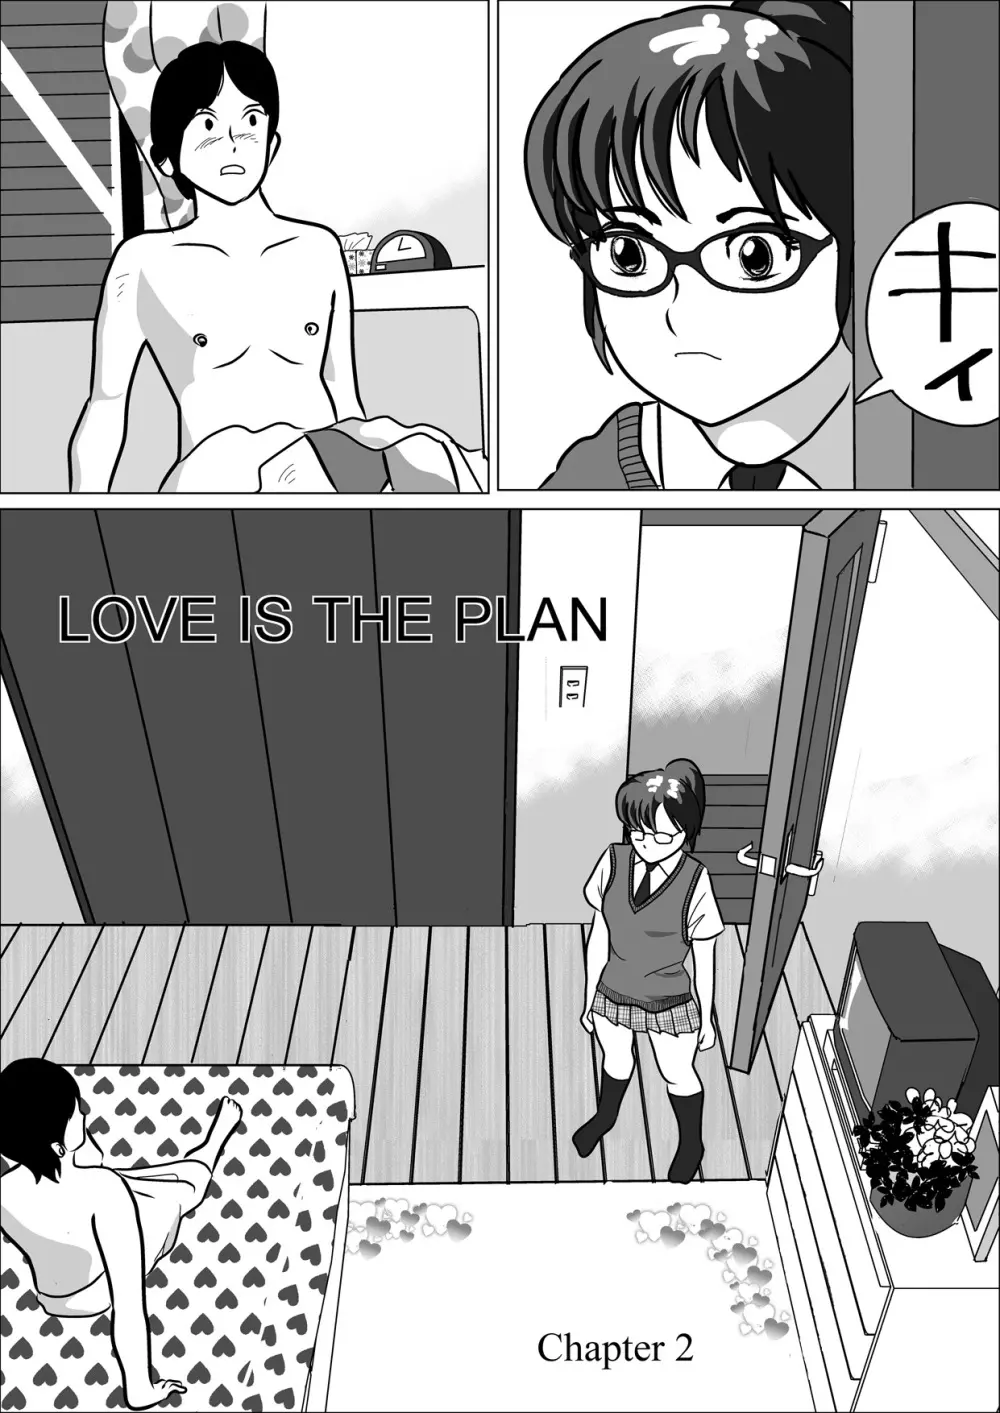 LOVE IS THE PLAN Chapter 1 & 2 23ページ